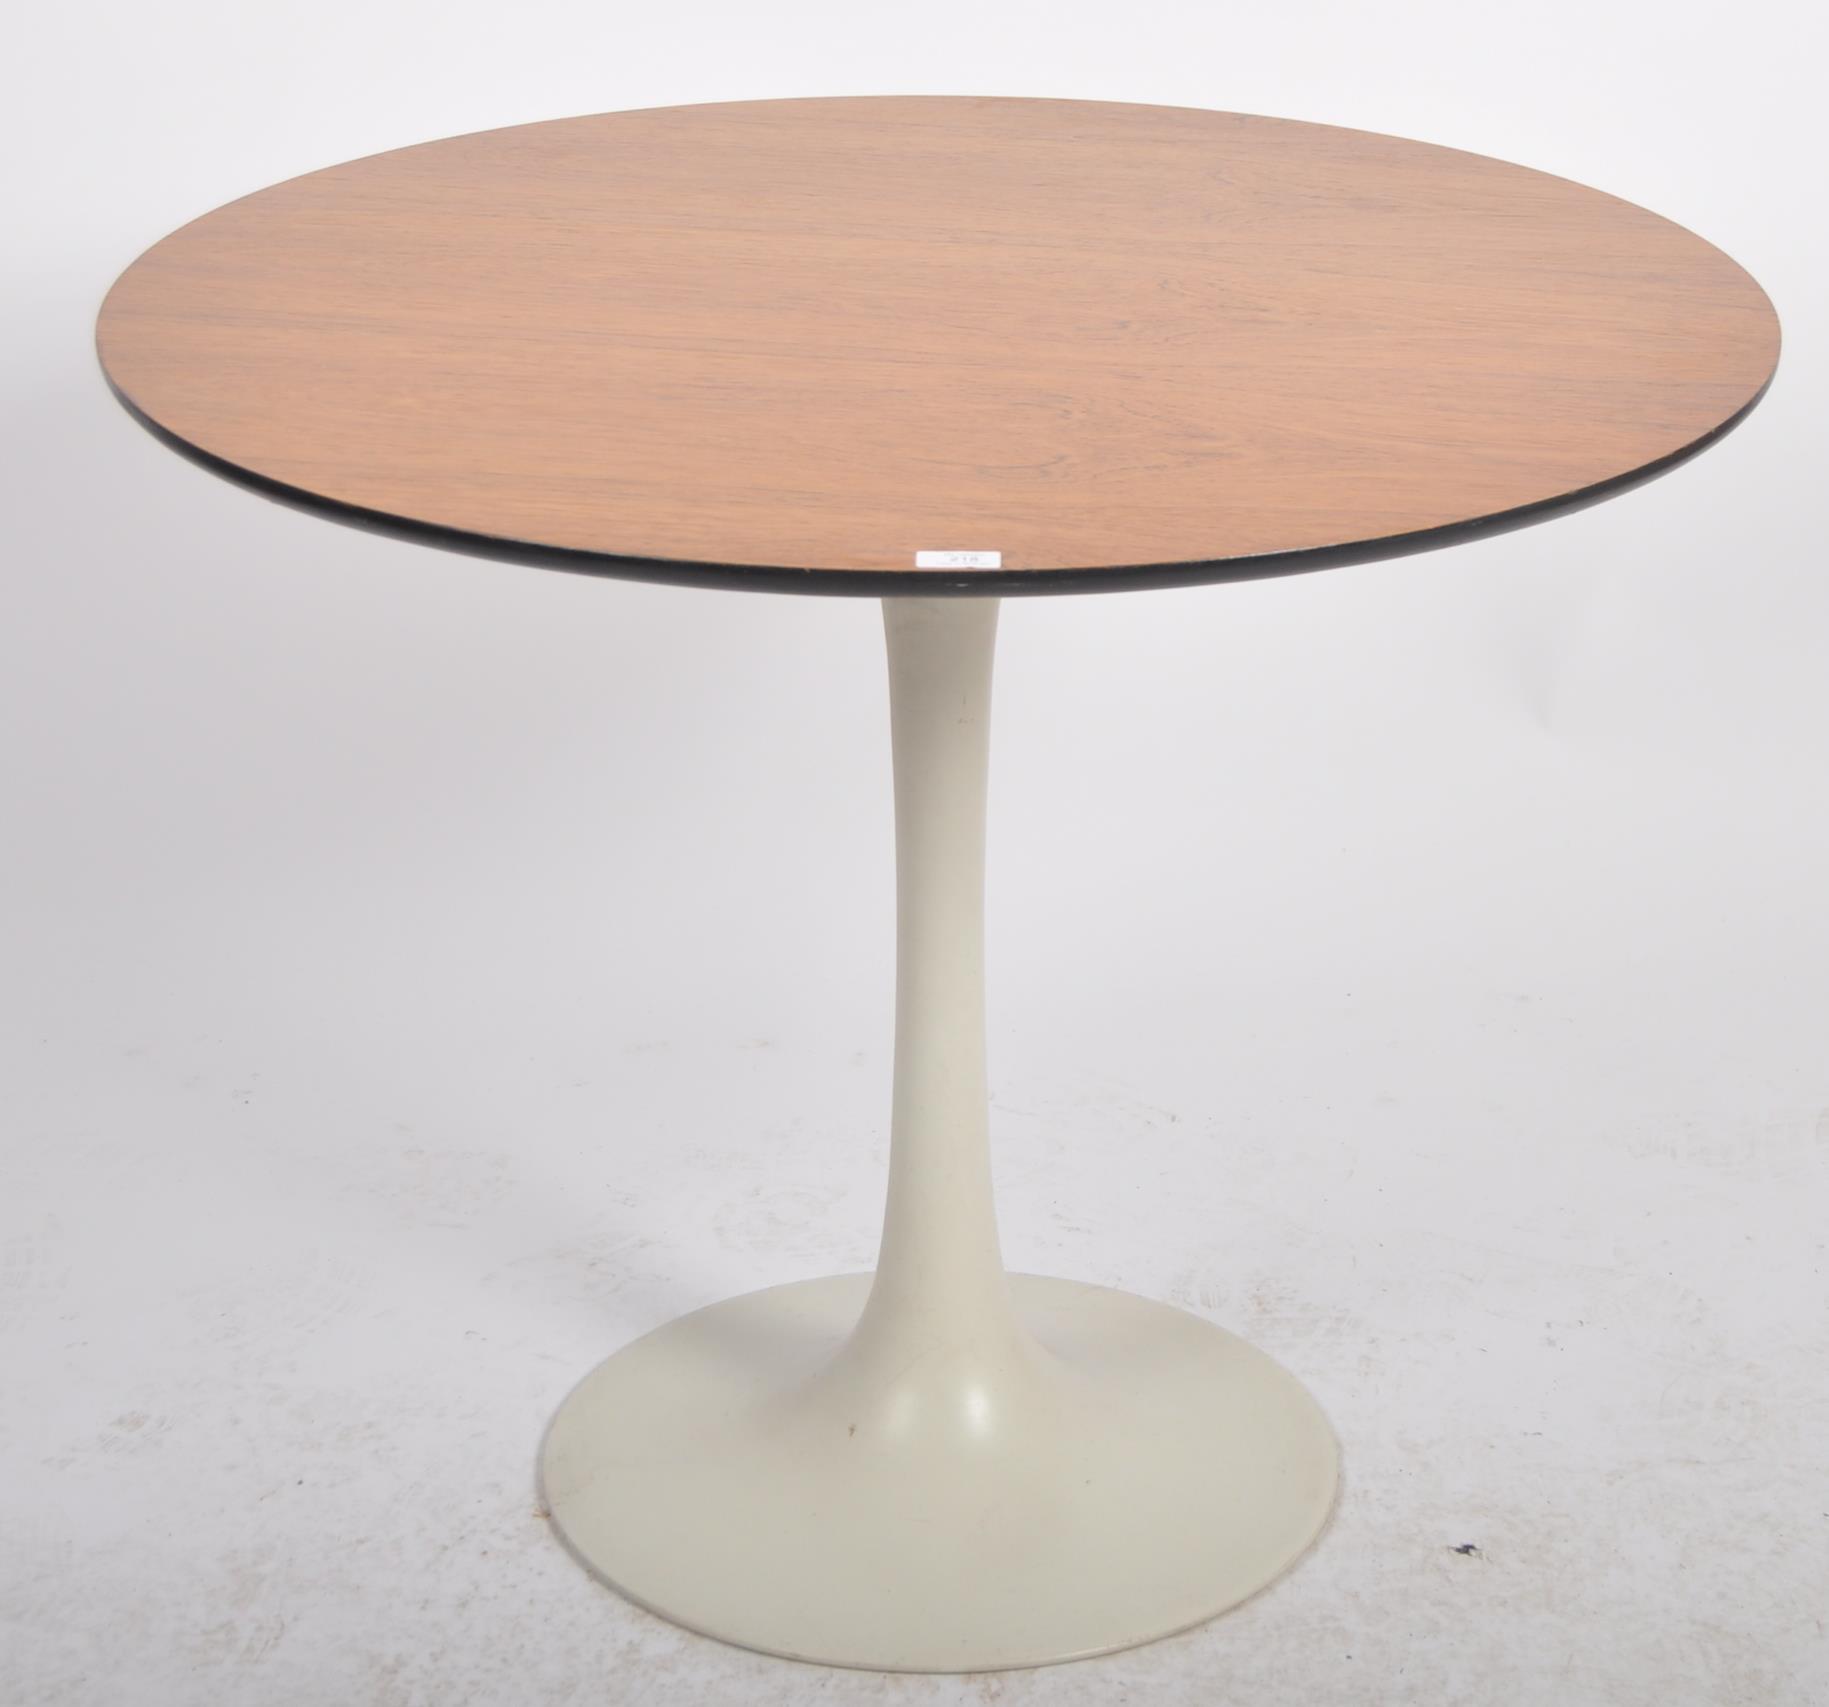 MAURICE BURKE FOR ARKANA - MID CENTURY DINING TABLE - Image 2 of 7